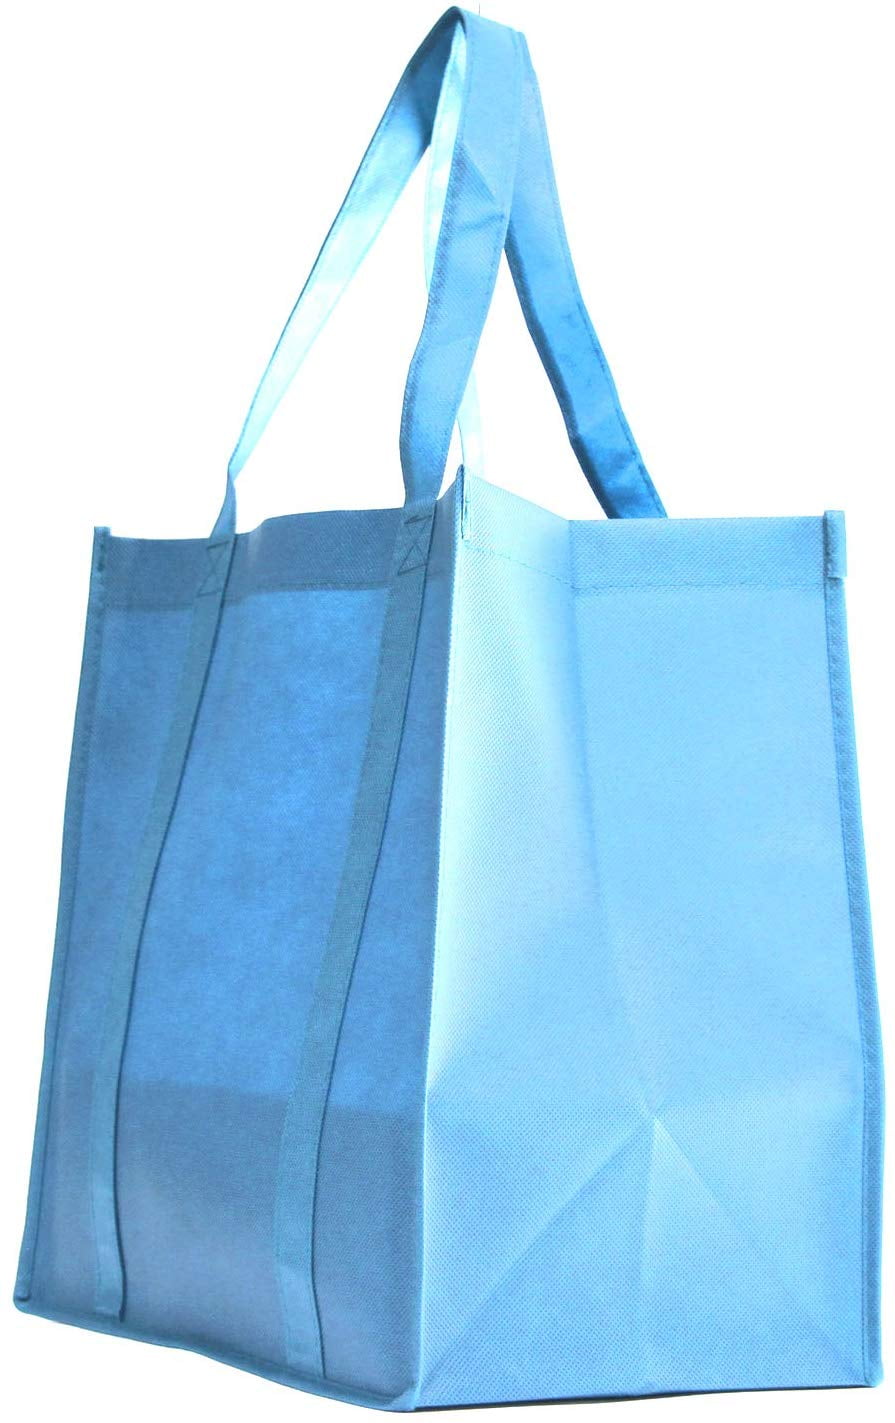 1 or 3-pack Jumbo Tote Shopping Bag Reusable Grocery Eco Storage 100% Cotton 